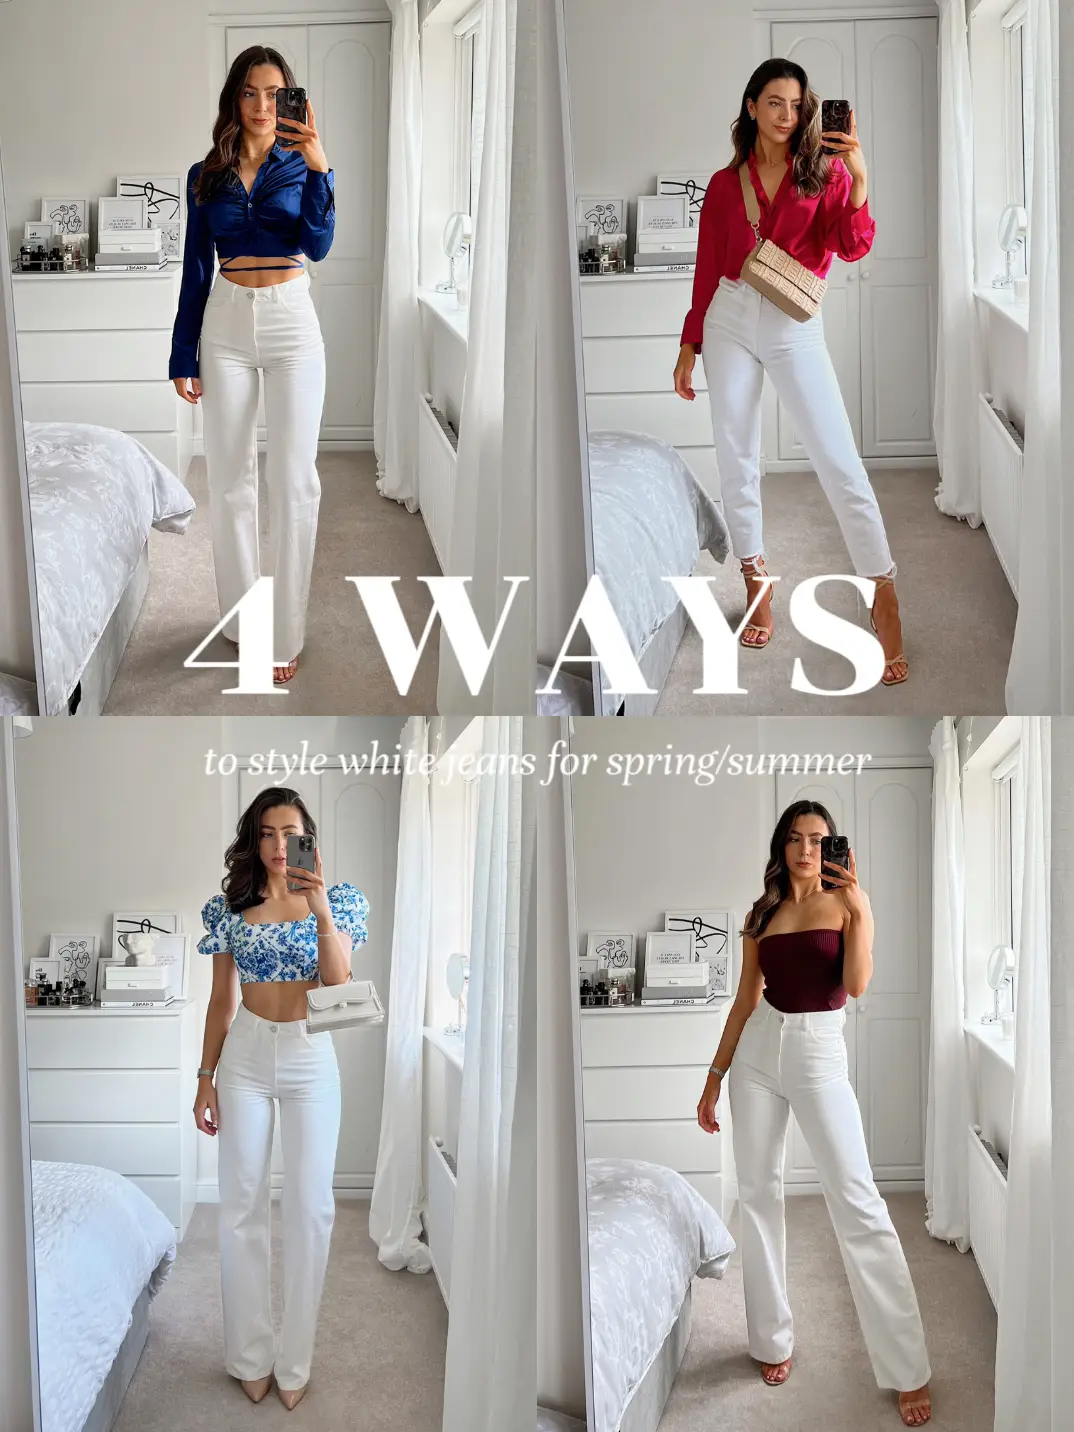 How to wear a corset? 4 outfit ideas